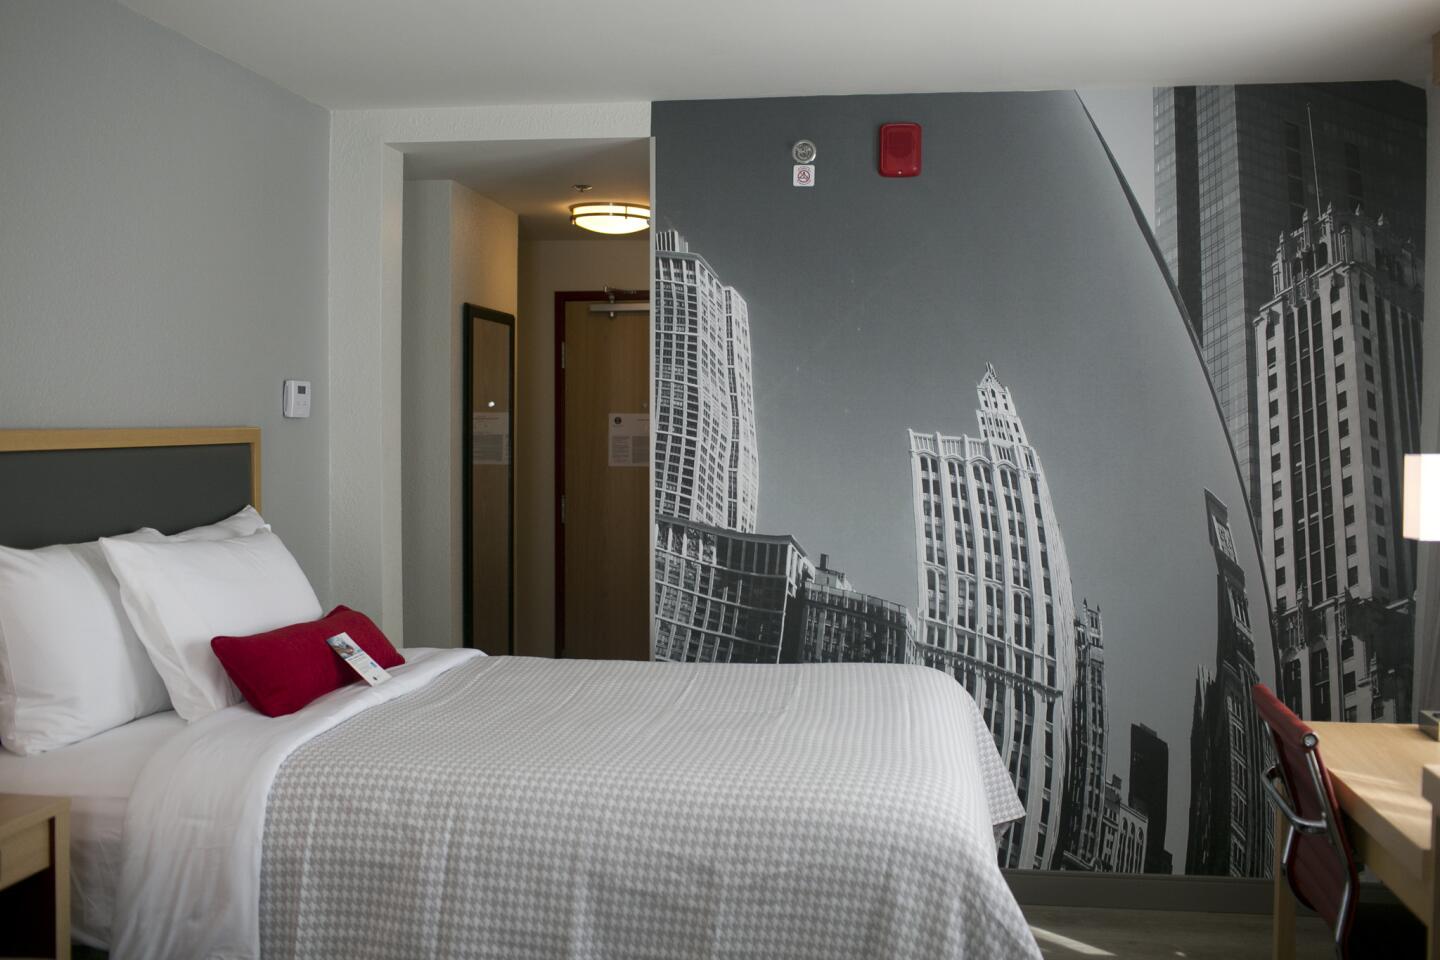 Vinyl images of the city’s architecture were applied to walls in most of the guest rooms.